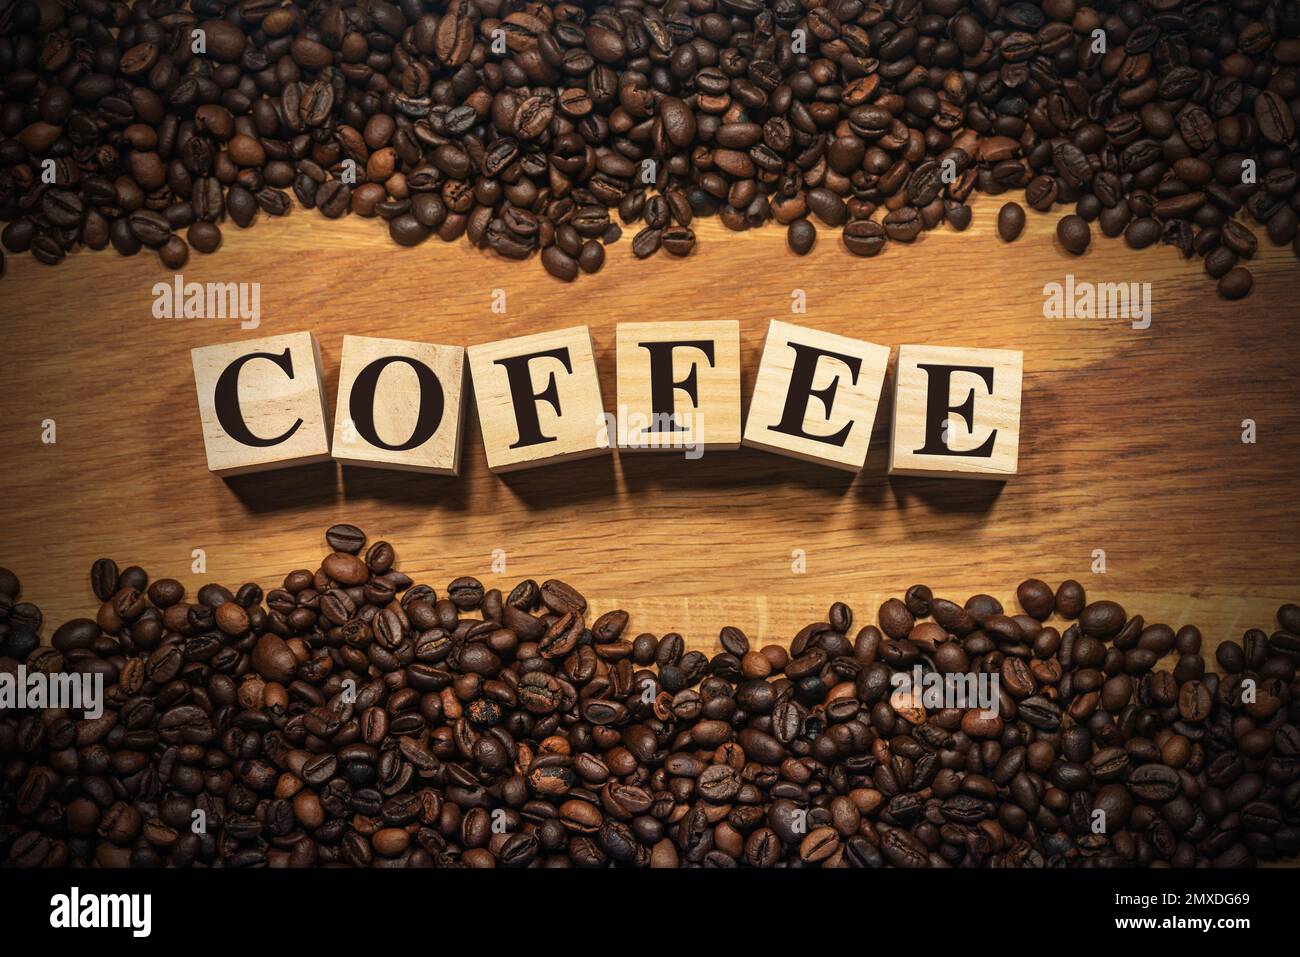 Large group of roasted coffee beans on a wooden background and the text Coffee, made of wooden blocks. Photography. Stock Photo